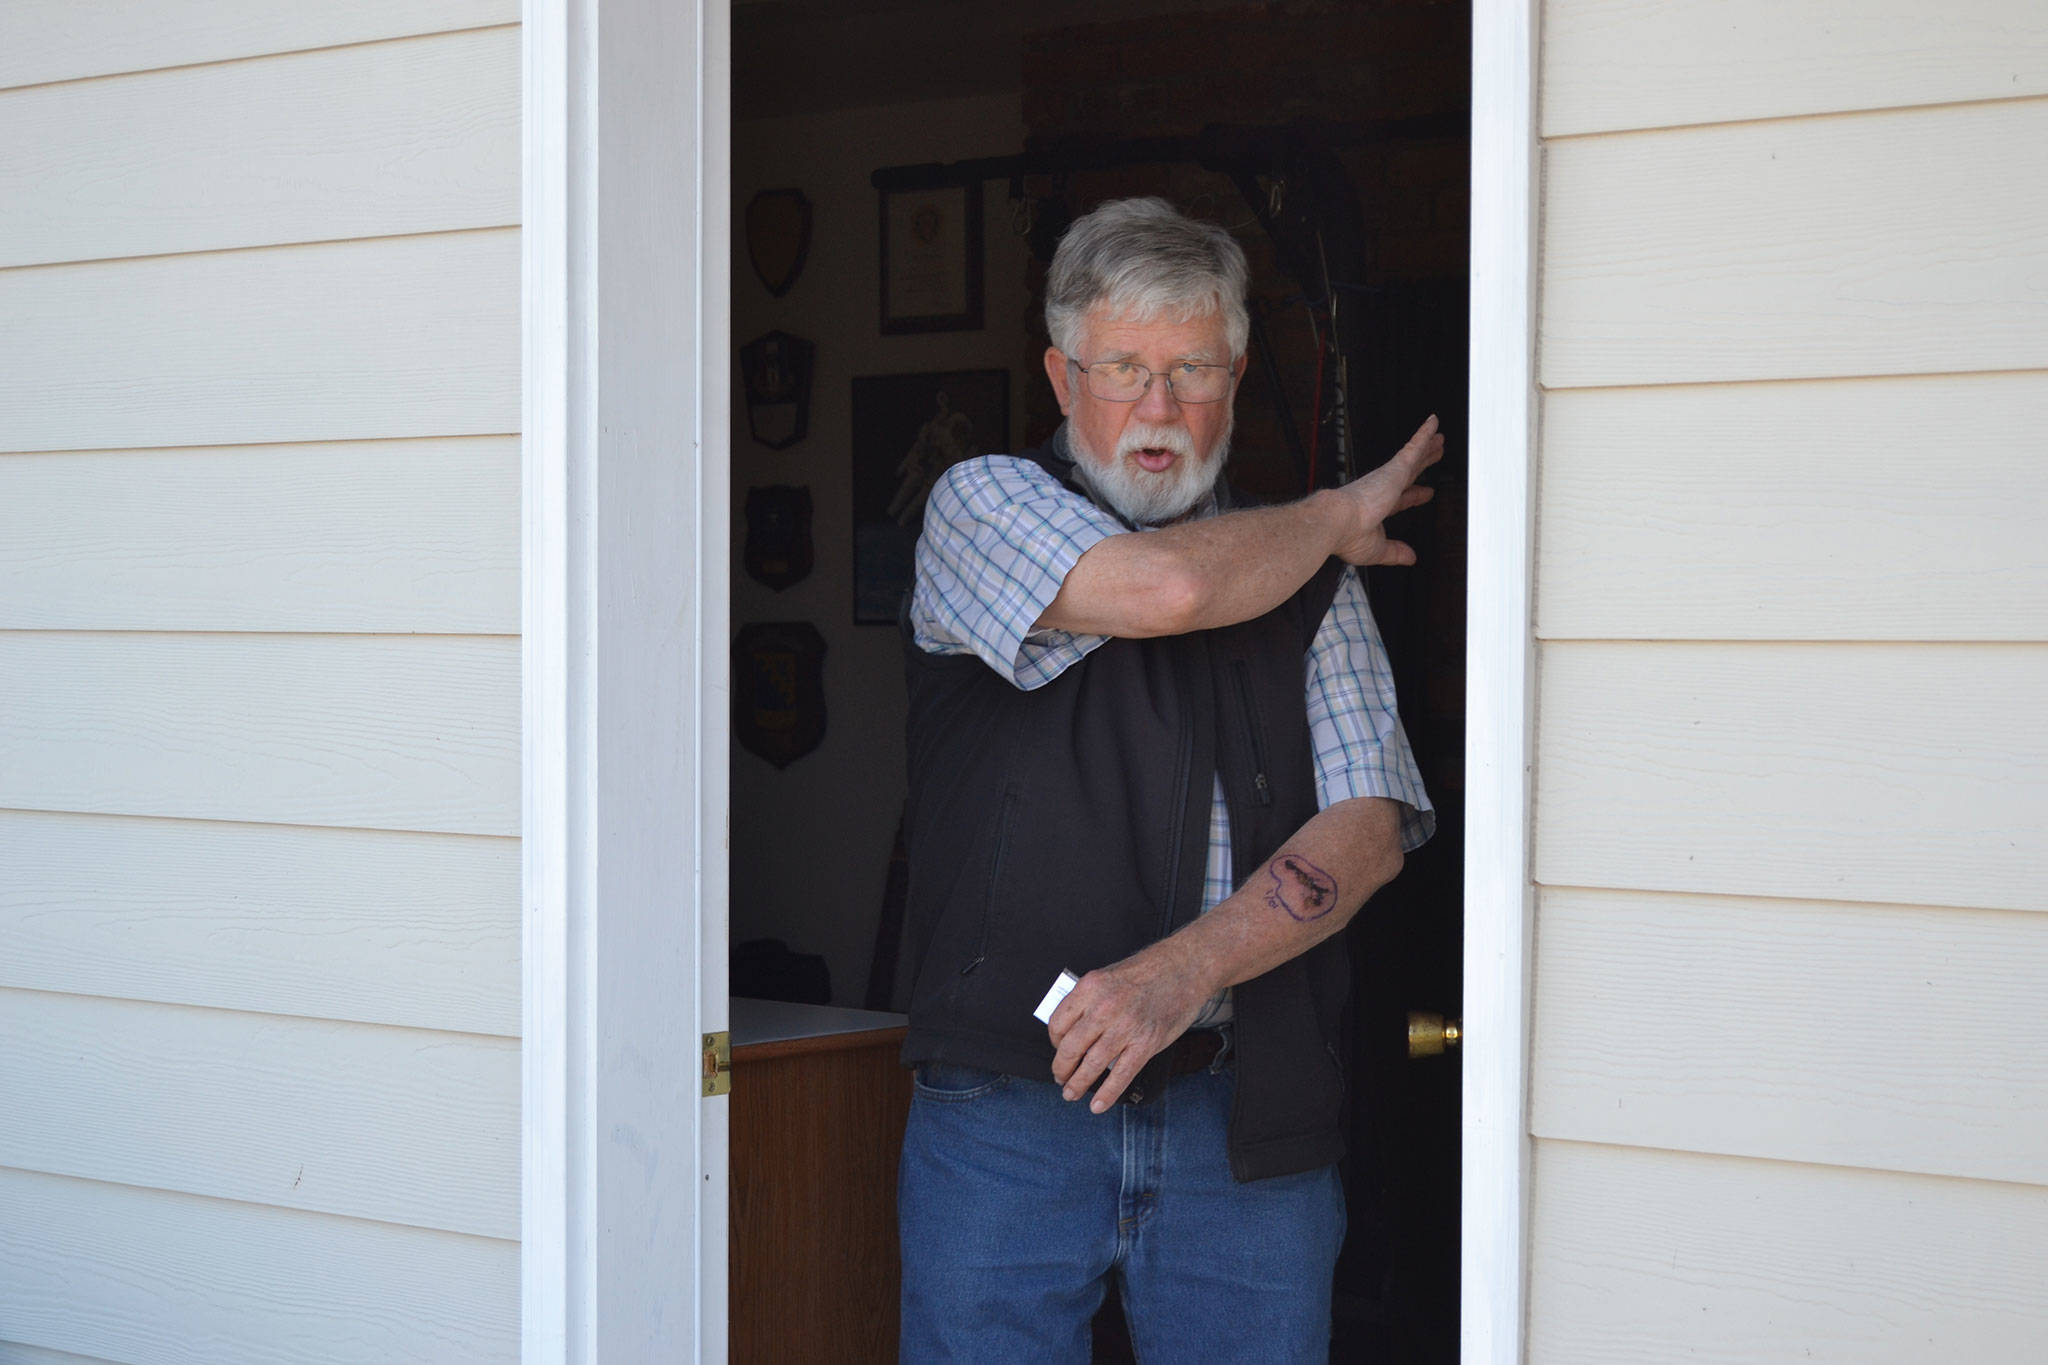 Terry Moore, 74, describes how three pit bulls attacked him outside his home on Sept. 23. Two dogs have been euthanized so far and a third one is scheduled to be put down soon as well after being declared “dangerous” by city officials. Sequim Gazette photo by Matthew Nash